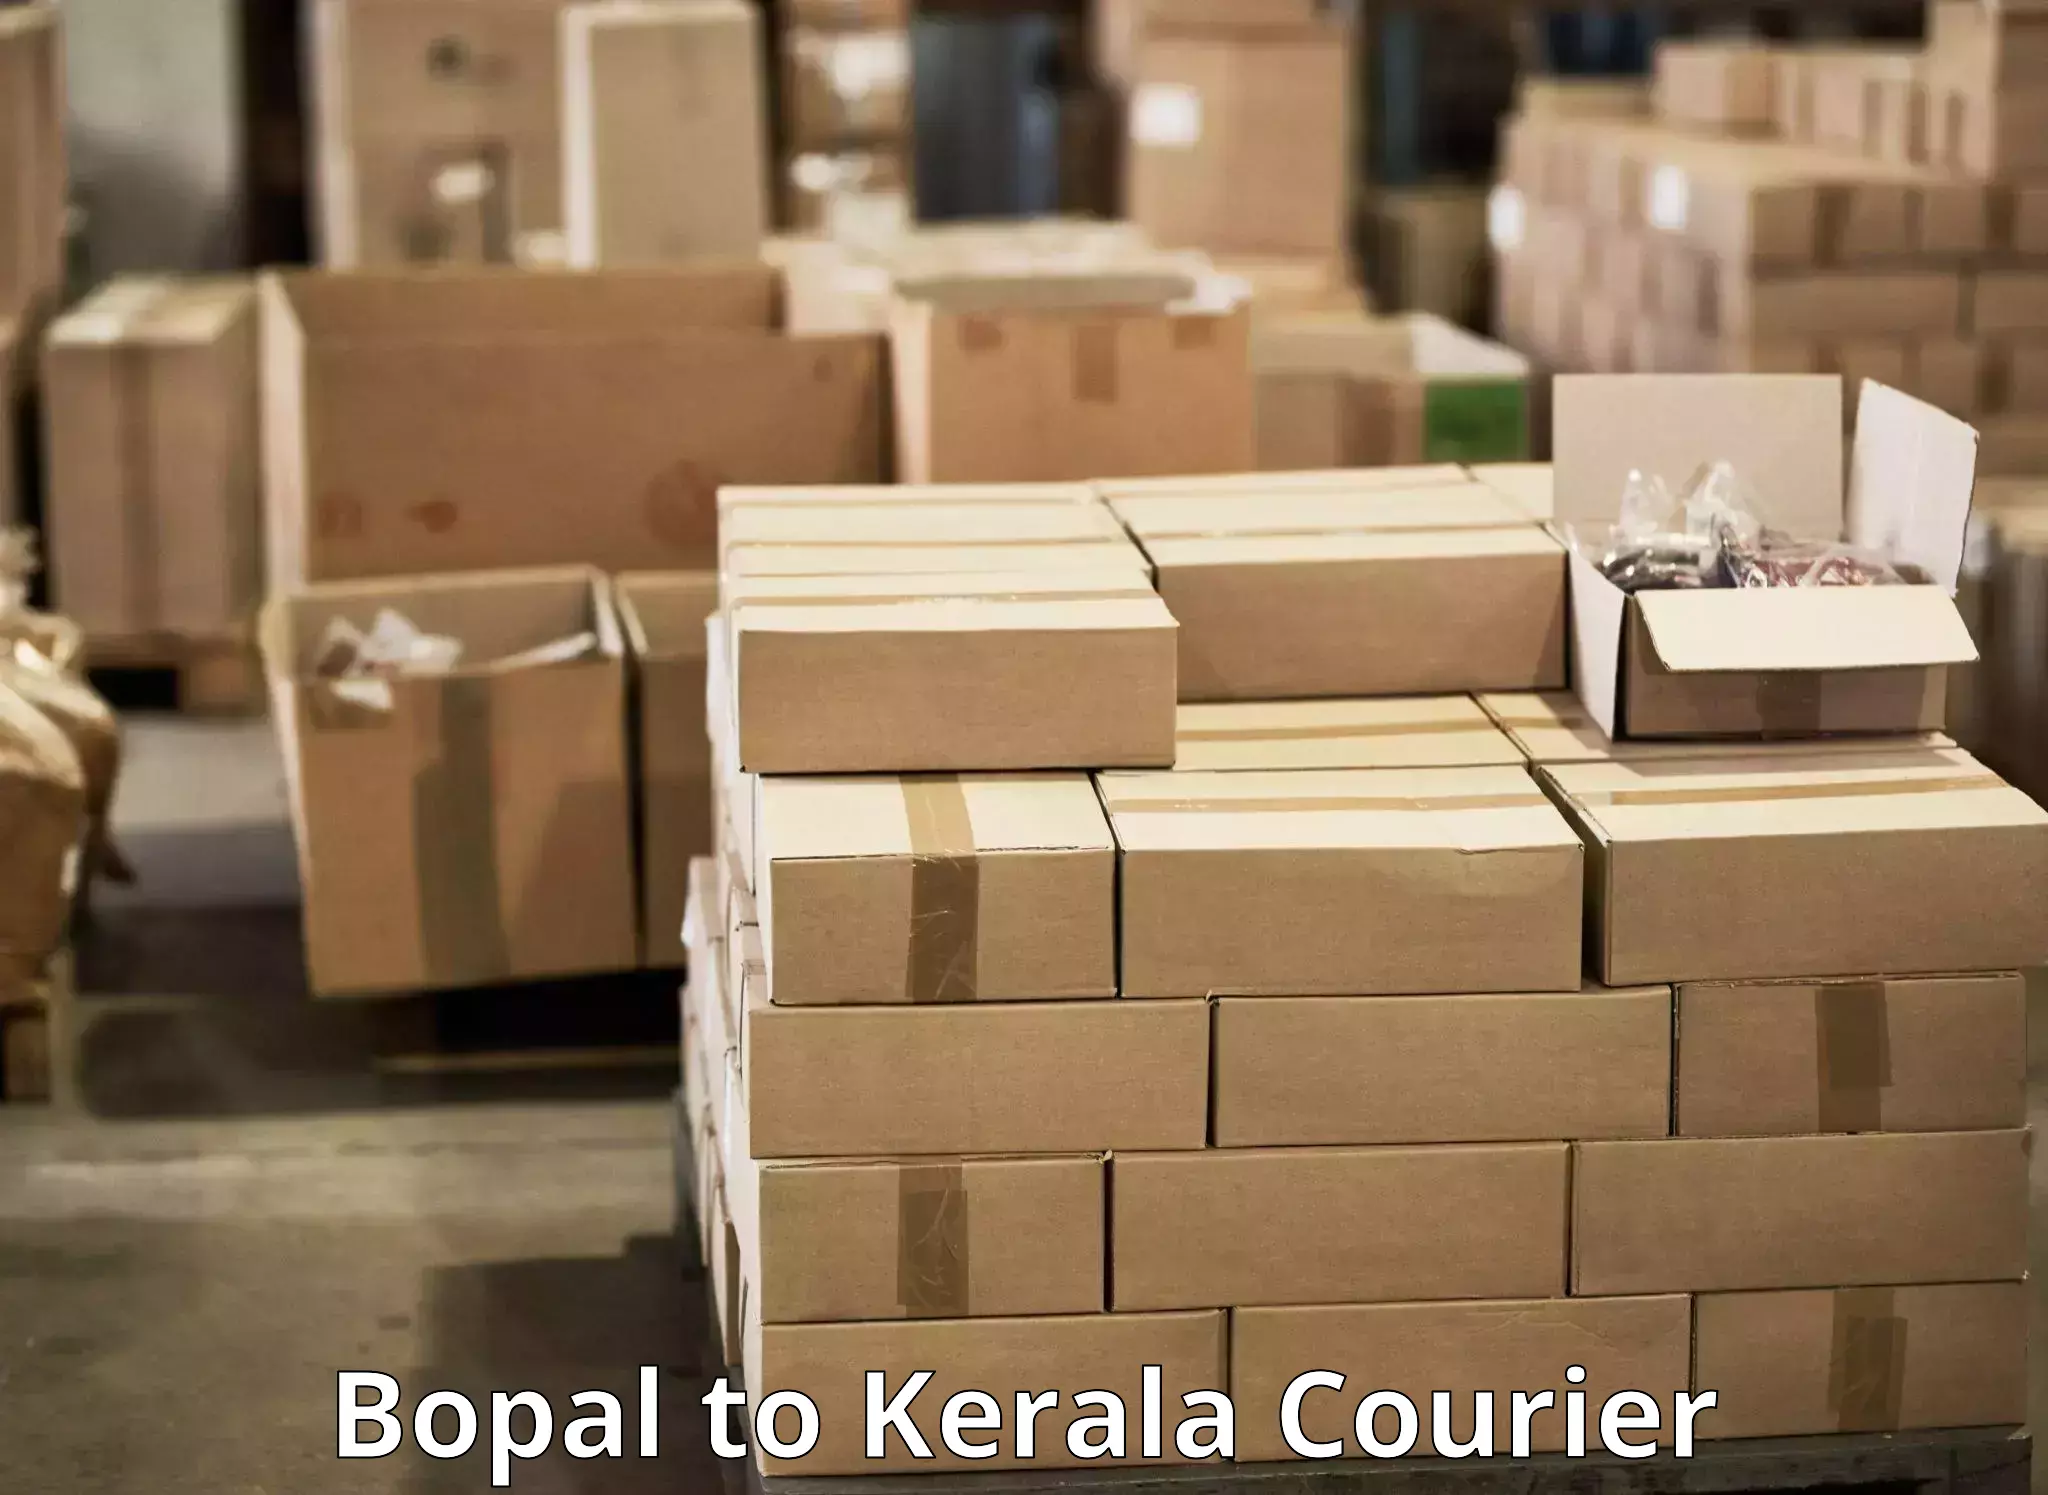 Courier service efficiency Bopal to Pathanamthitta